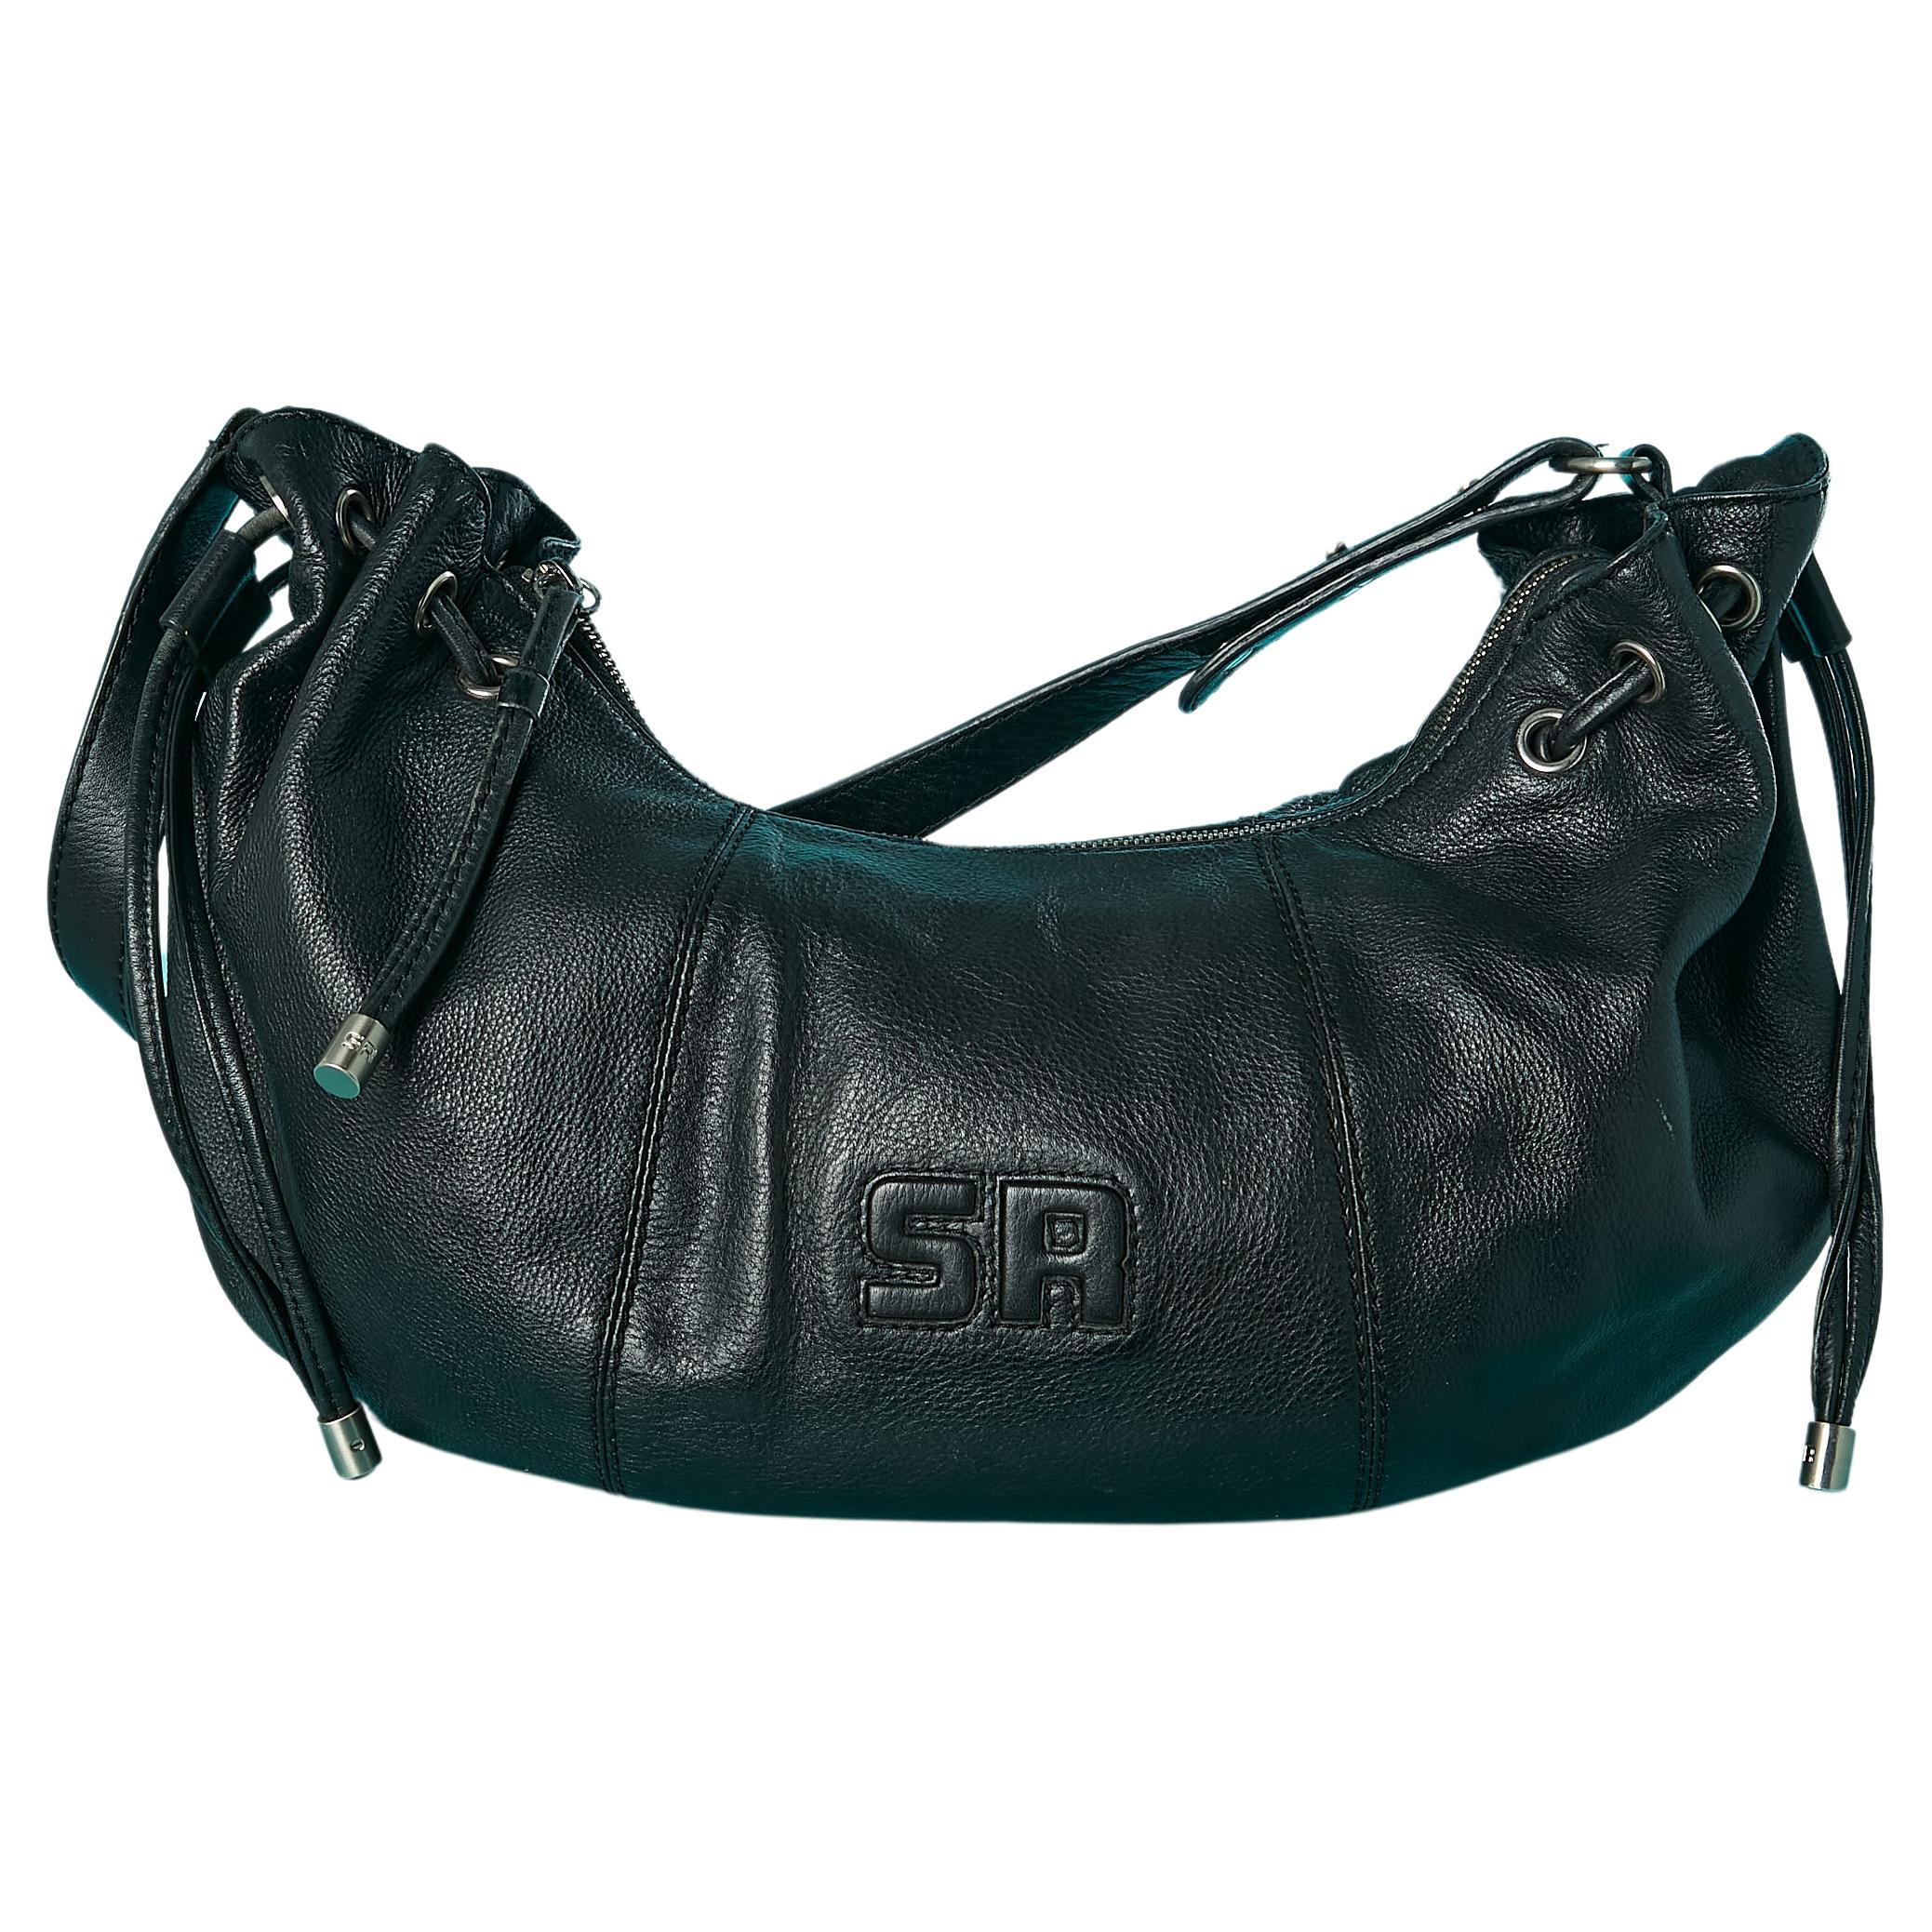 Black leather drawstrings bag with shoulder strap Sonia Rykiel  For Sale